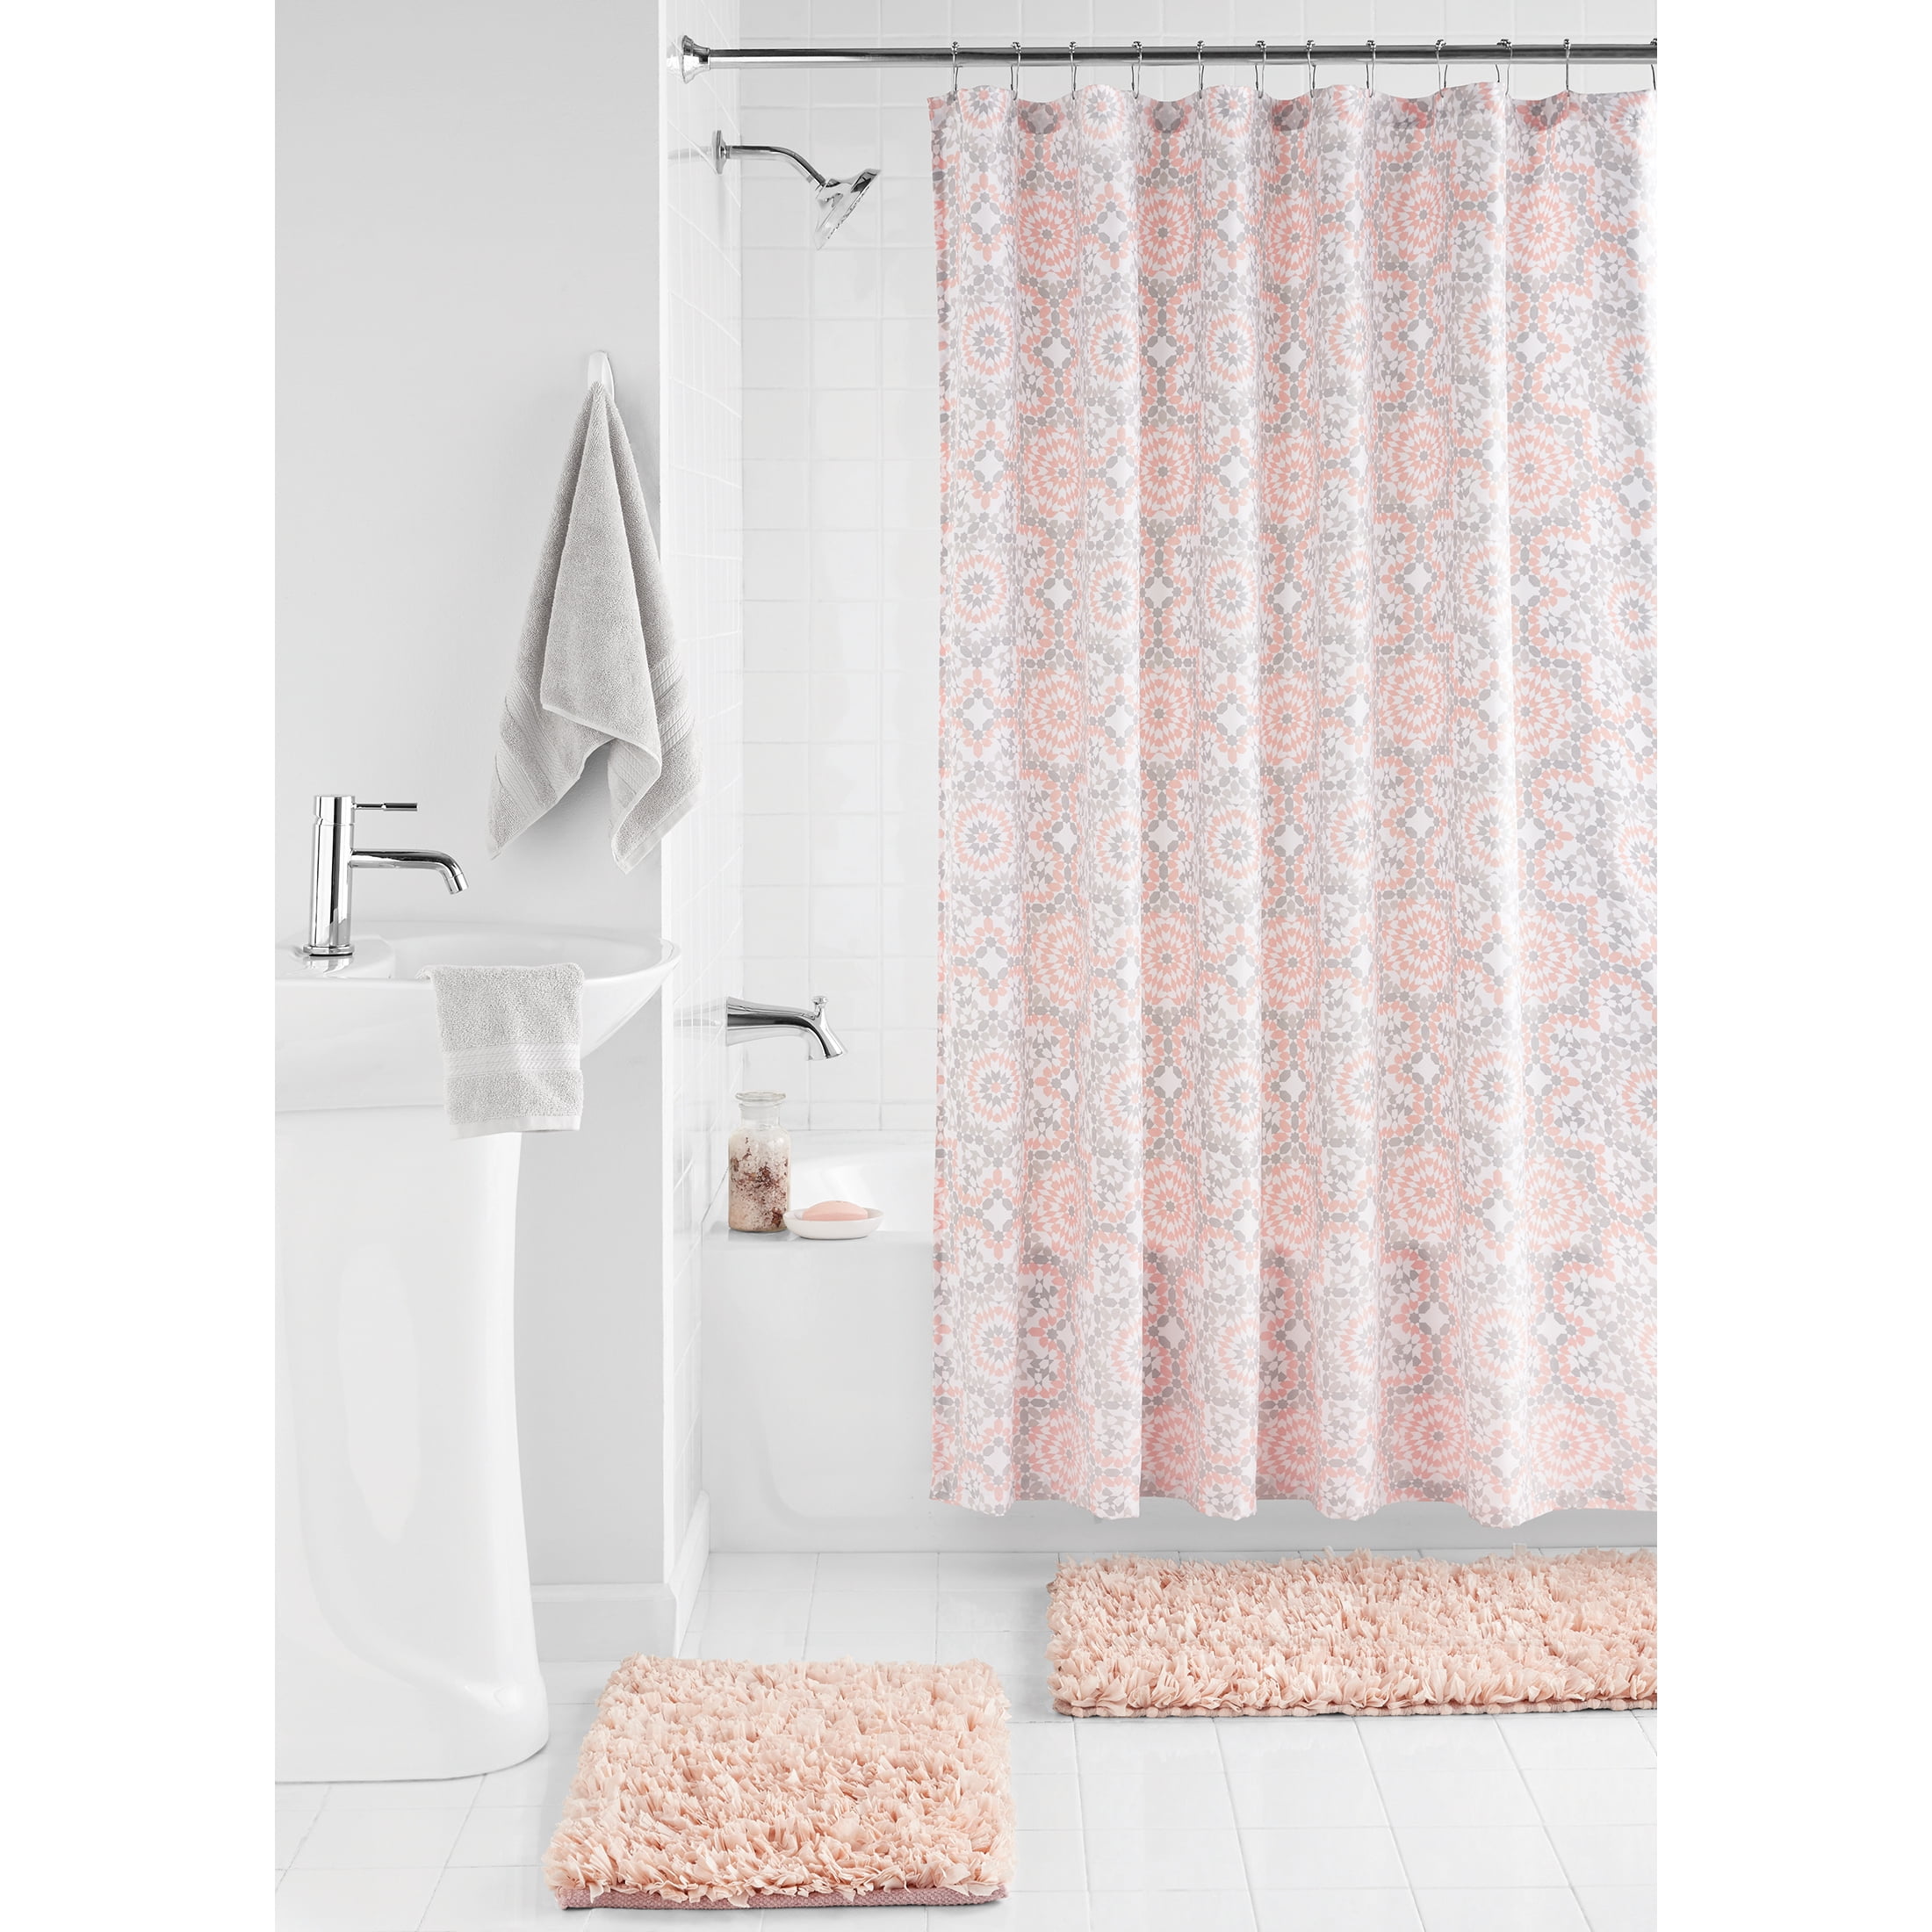 Details about   Ombre Shower Curtain Muddy Nature Themed Art Print for Bathroom 